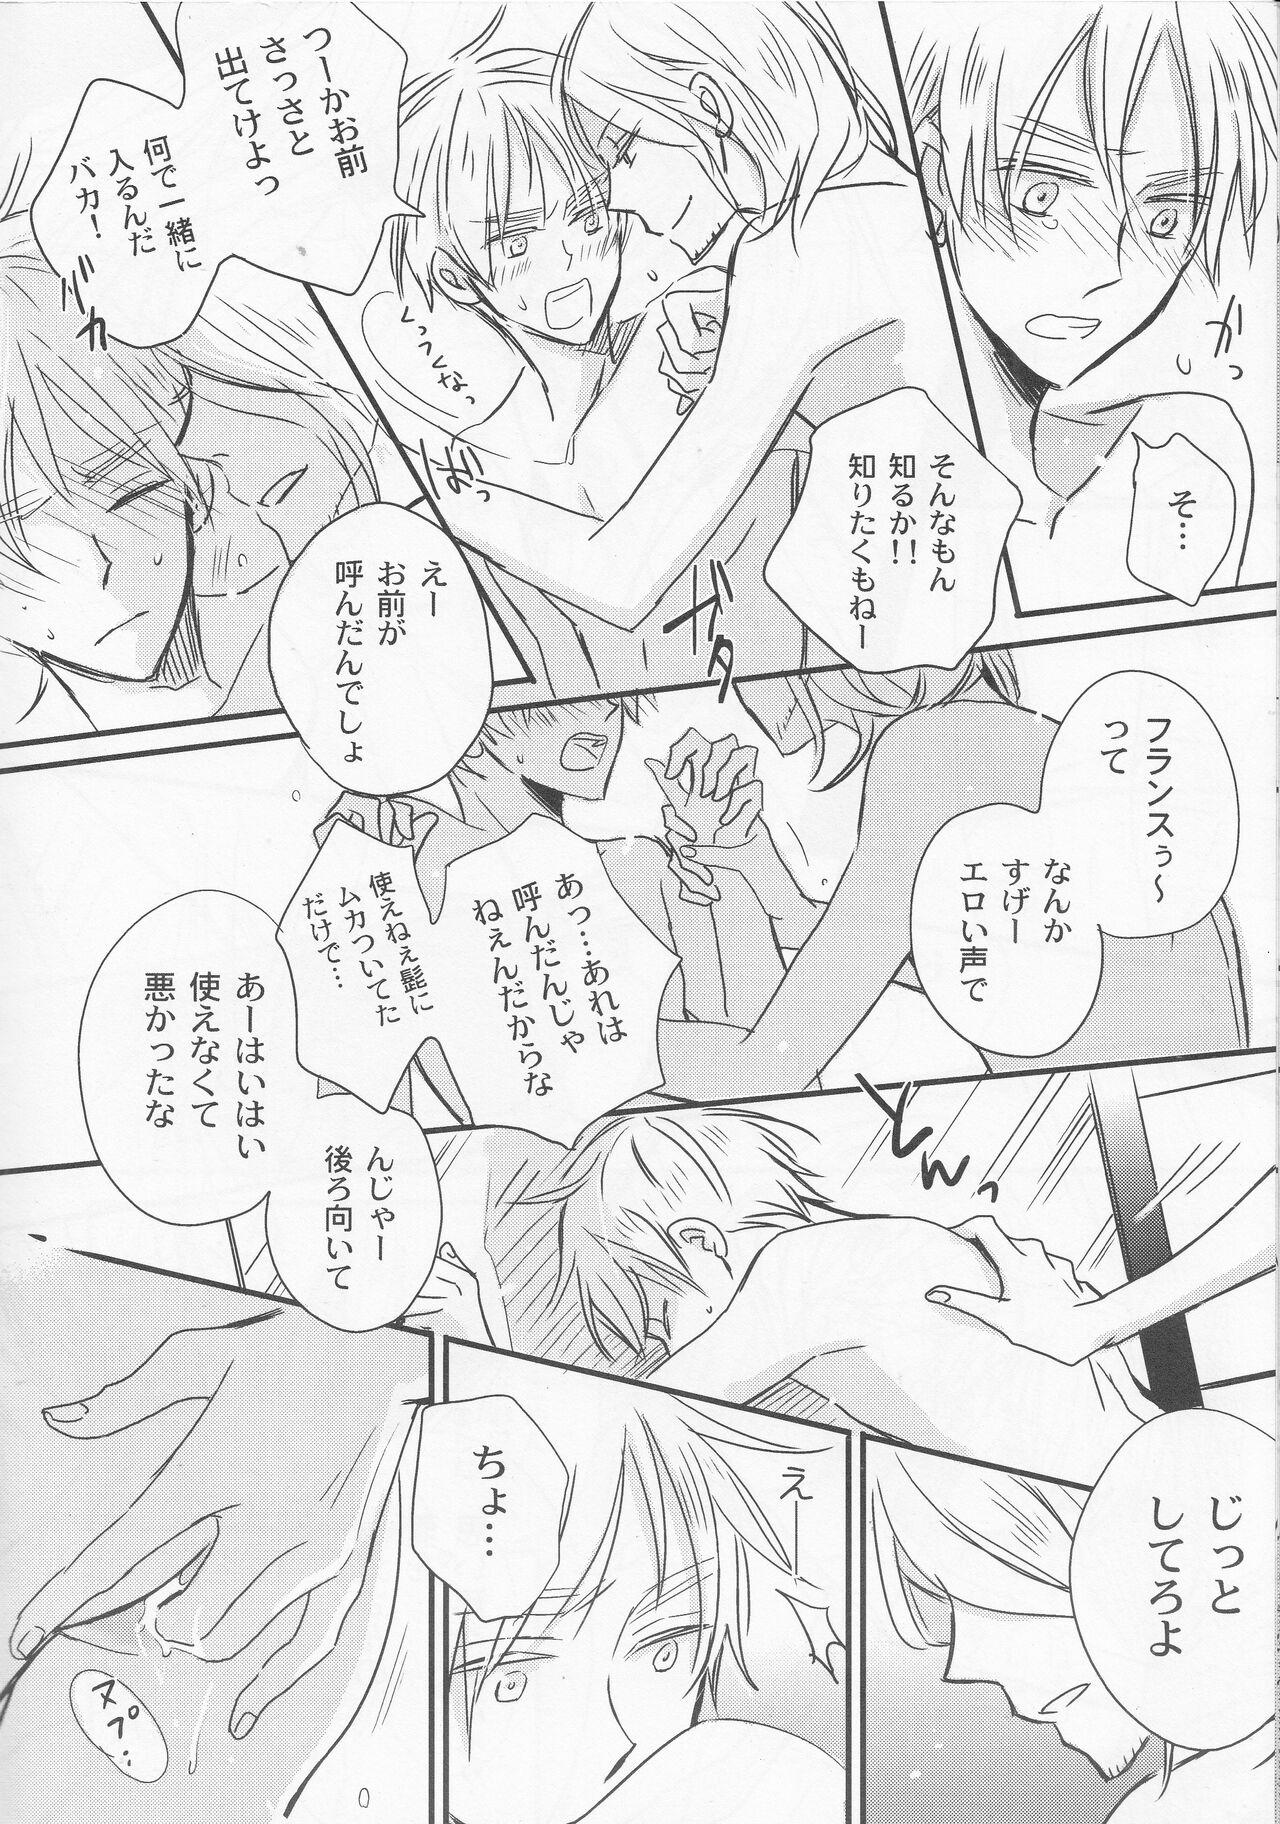 Gritona unknown title - Axis powers hetalia Black Gay - Page 11